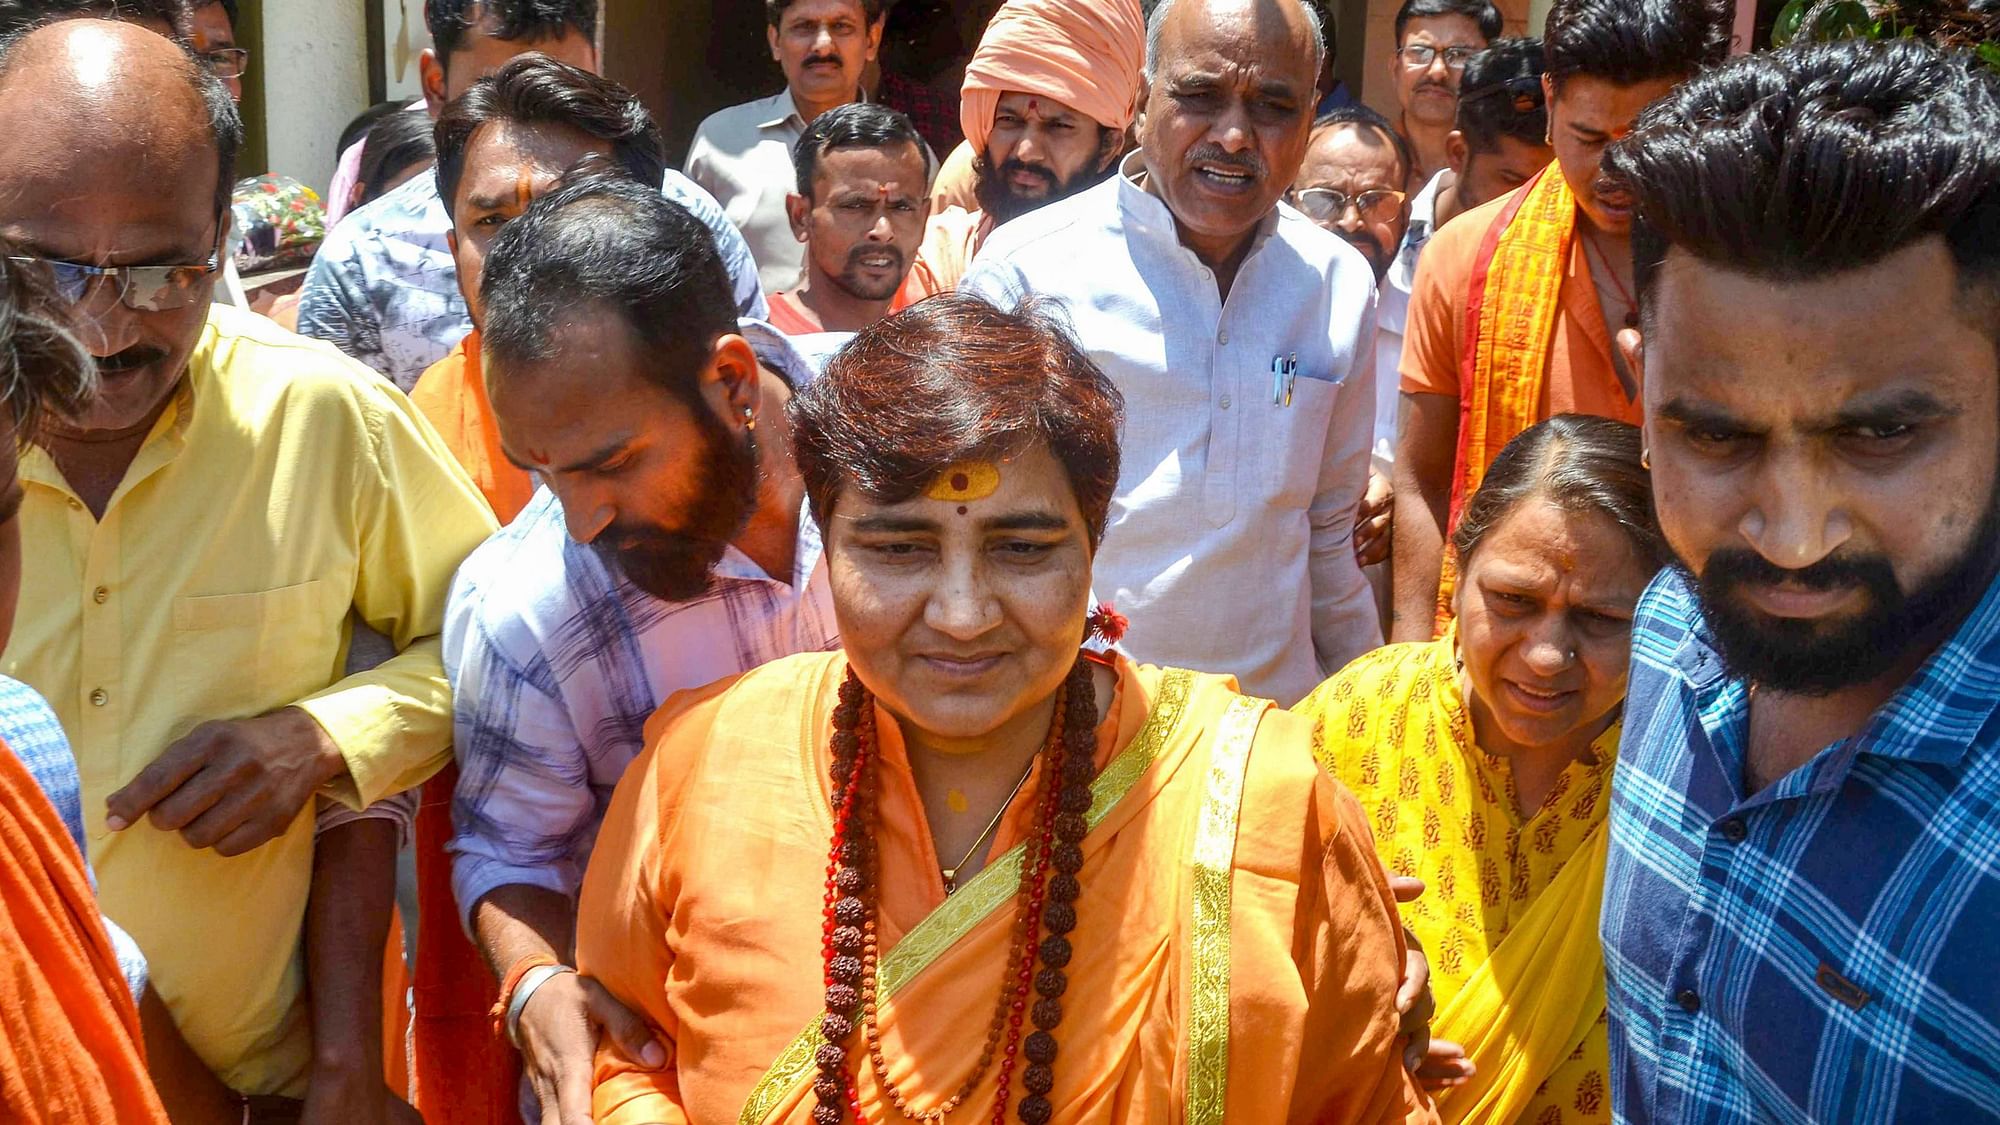 Pragya Thakur, who was accused in the 2008 Malegaon blasts case, has stirred up quite a storm with her remarks about 26/11 hero cop Hemant Karkare.